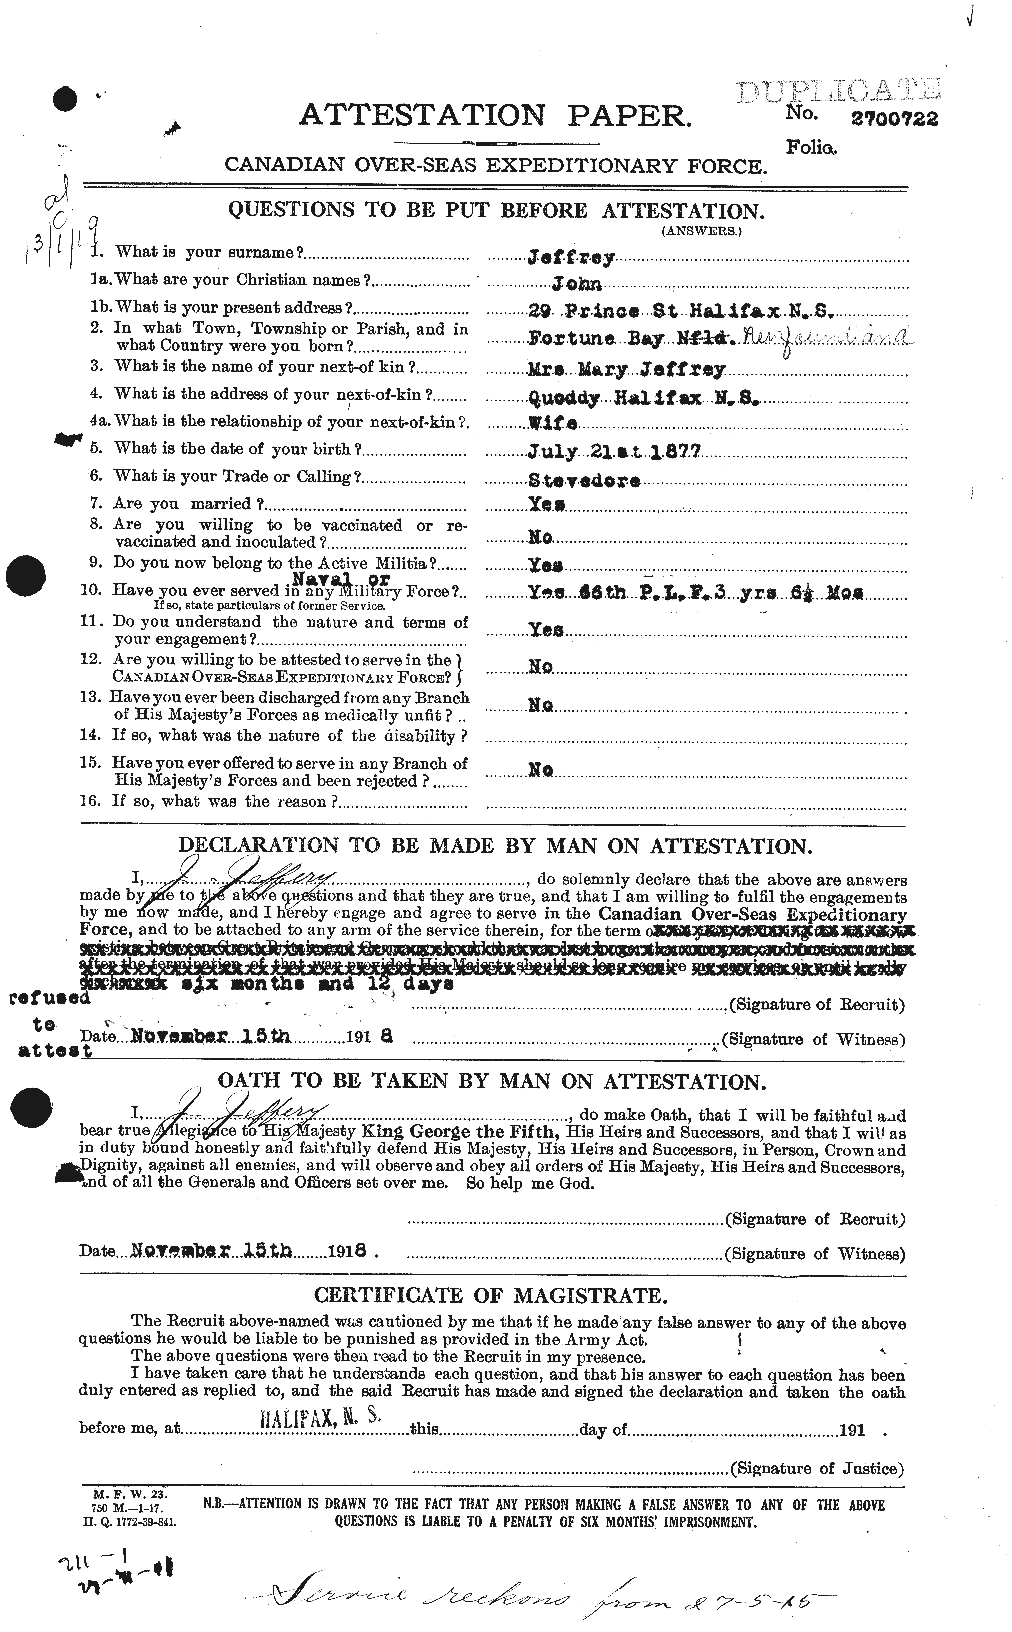 Personnel Records of the First World War - CEF 417910a